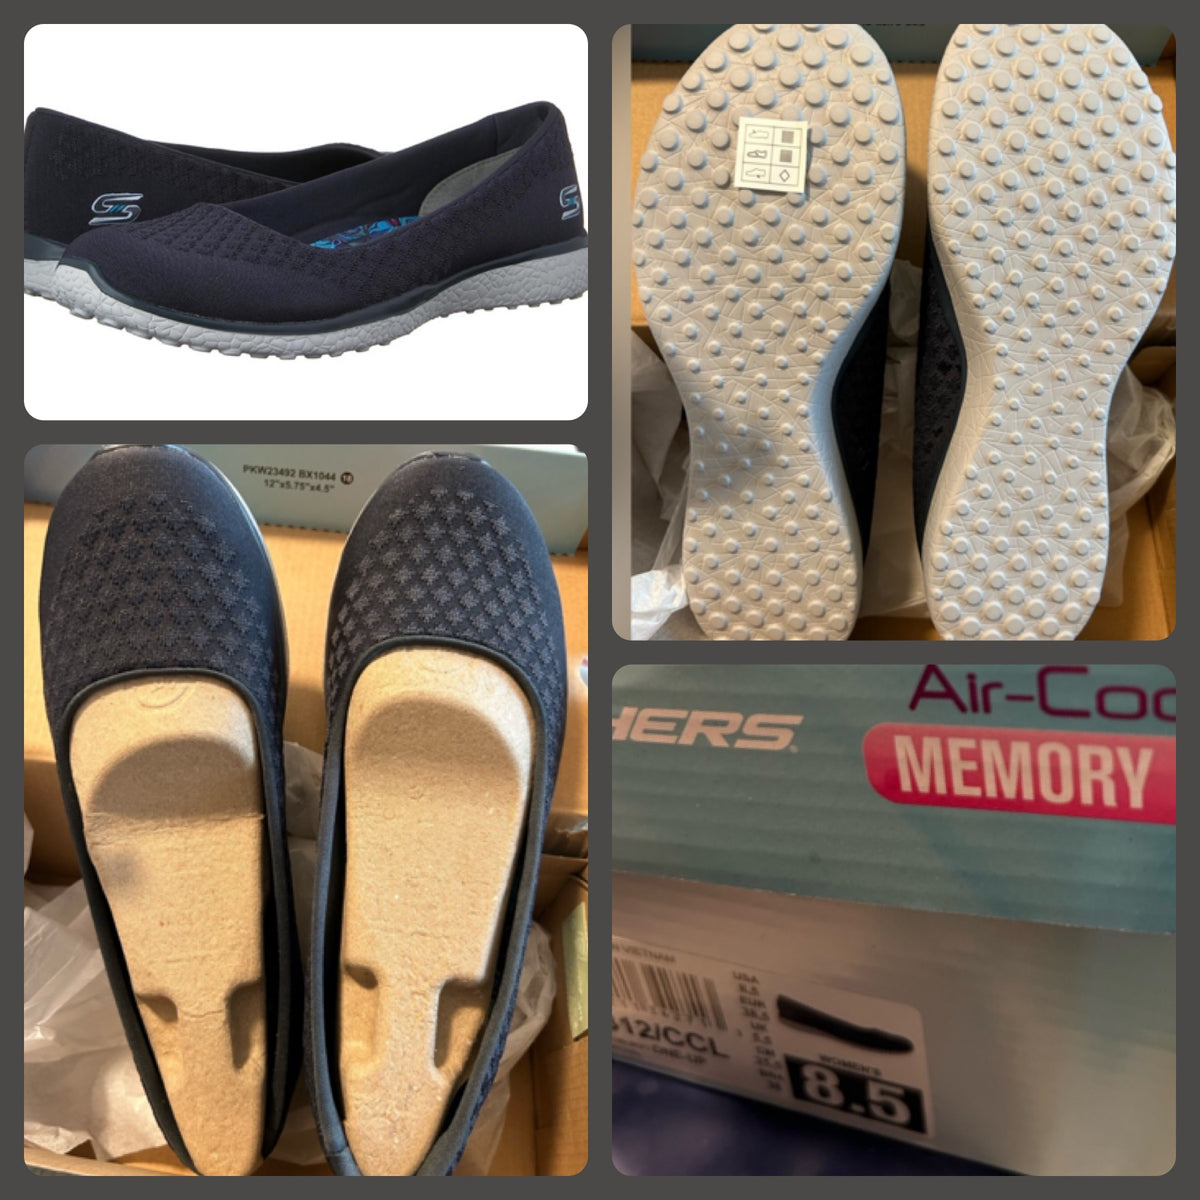 NEW Skechers sneakers Slip ons, microburst - size Shoes-Womens 8.5 ...